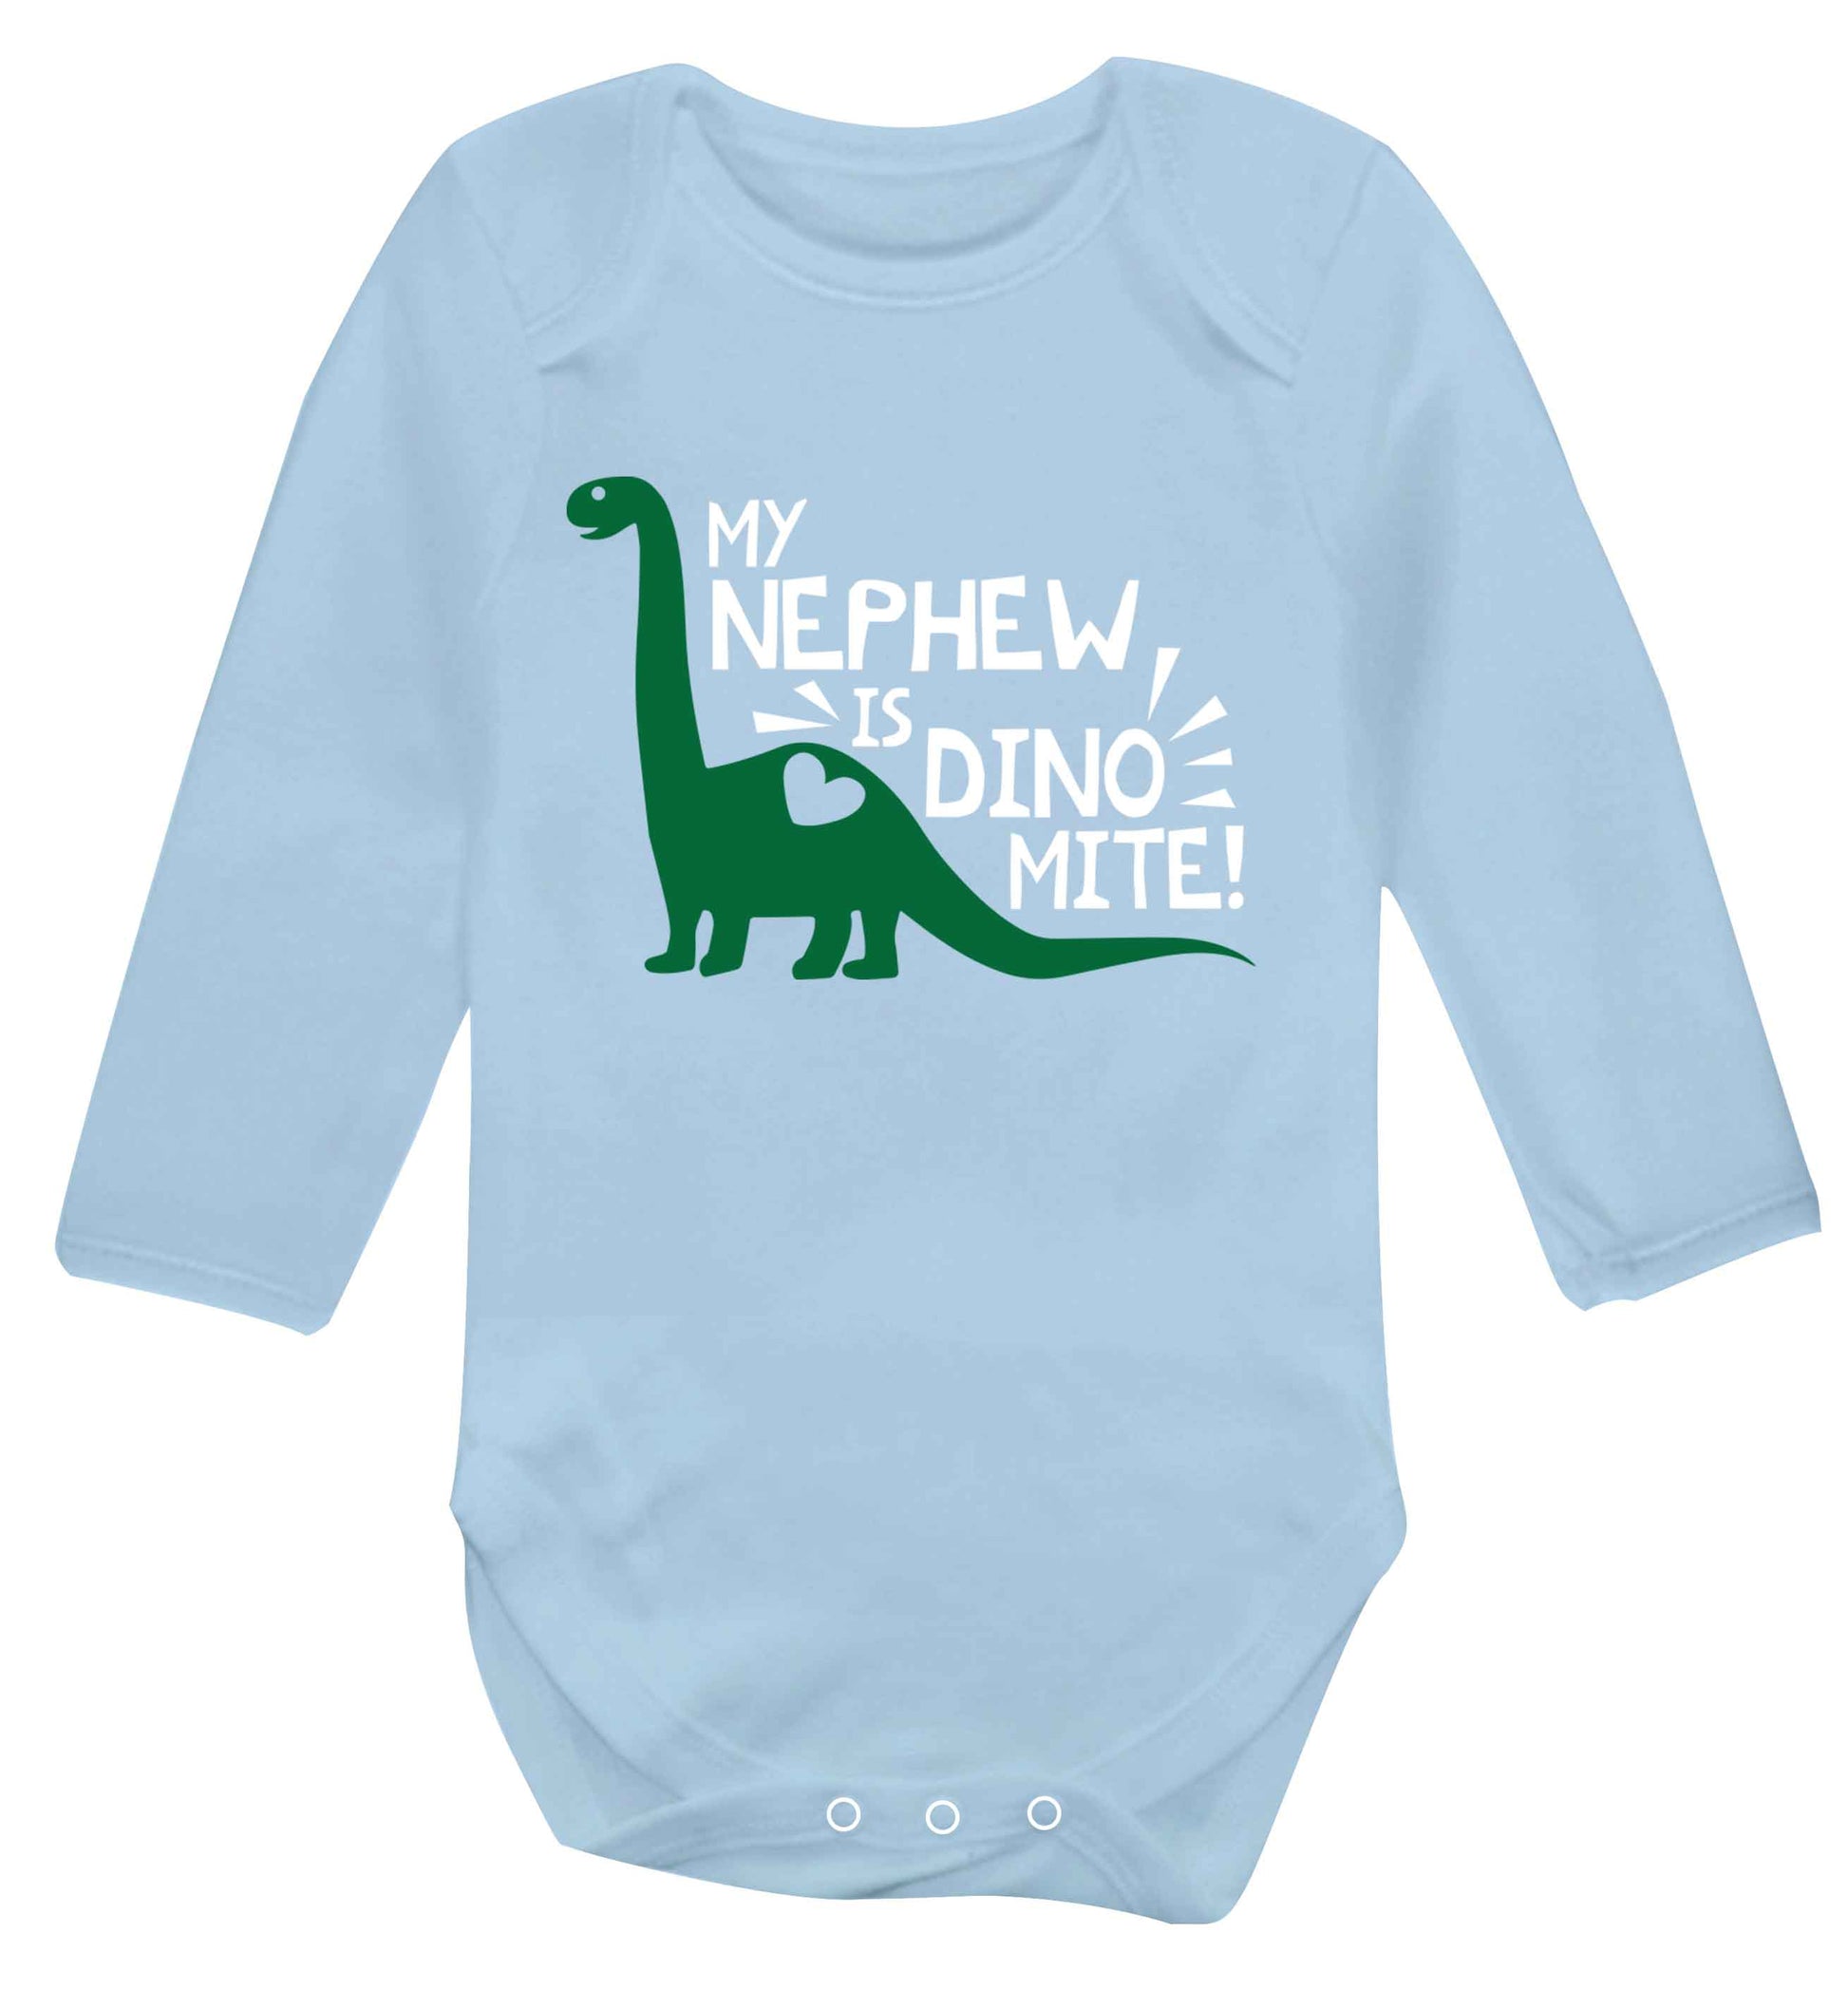 My nephew is dinomite! Baby Vest long sleeved pale blue 6-12 months